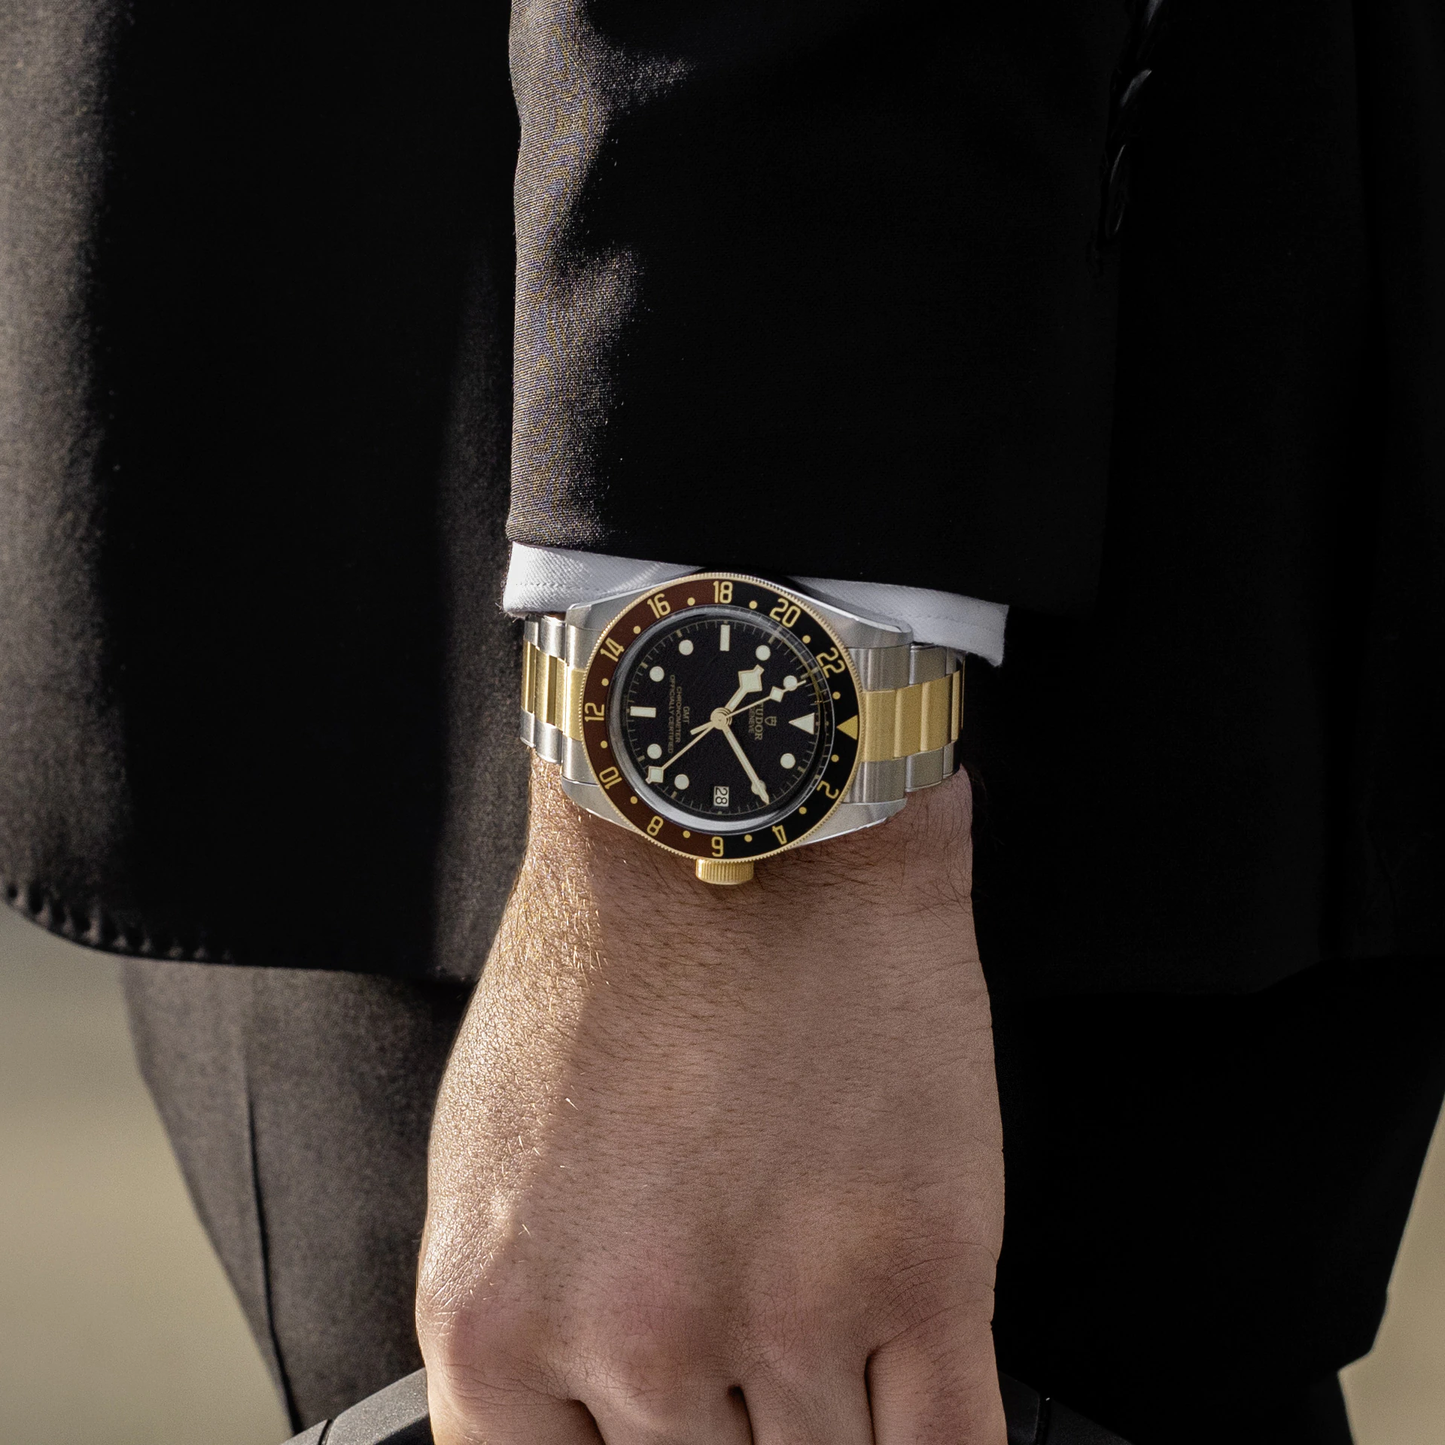 Tudor Black Bay GMT S&G, Stainless Steel and 18k Yellow Gold, 41mm, Ref# M79833MN-0001, Watch on hand